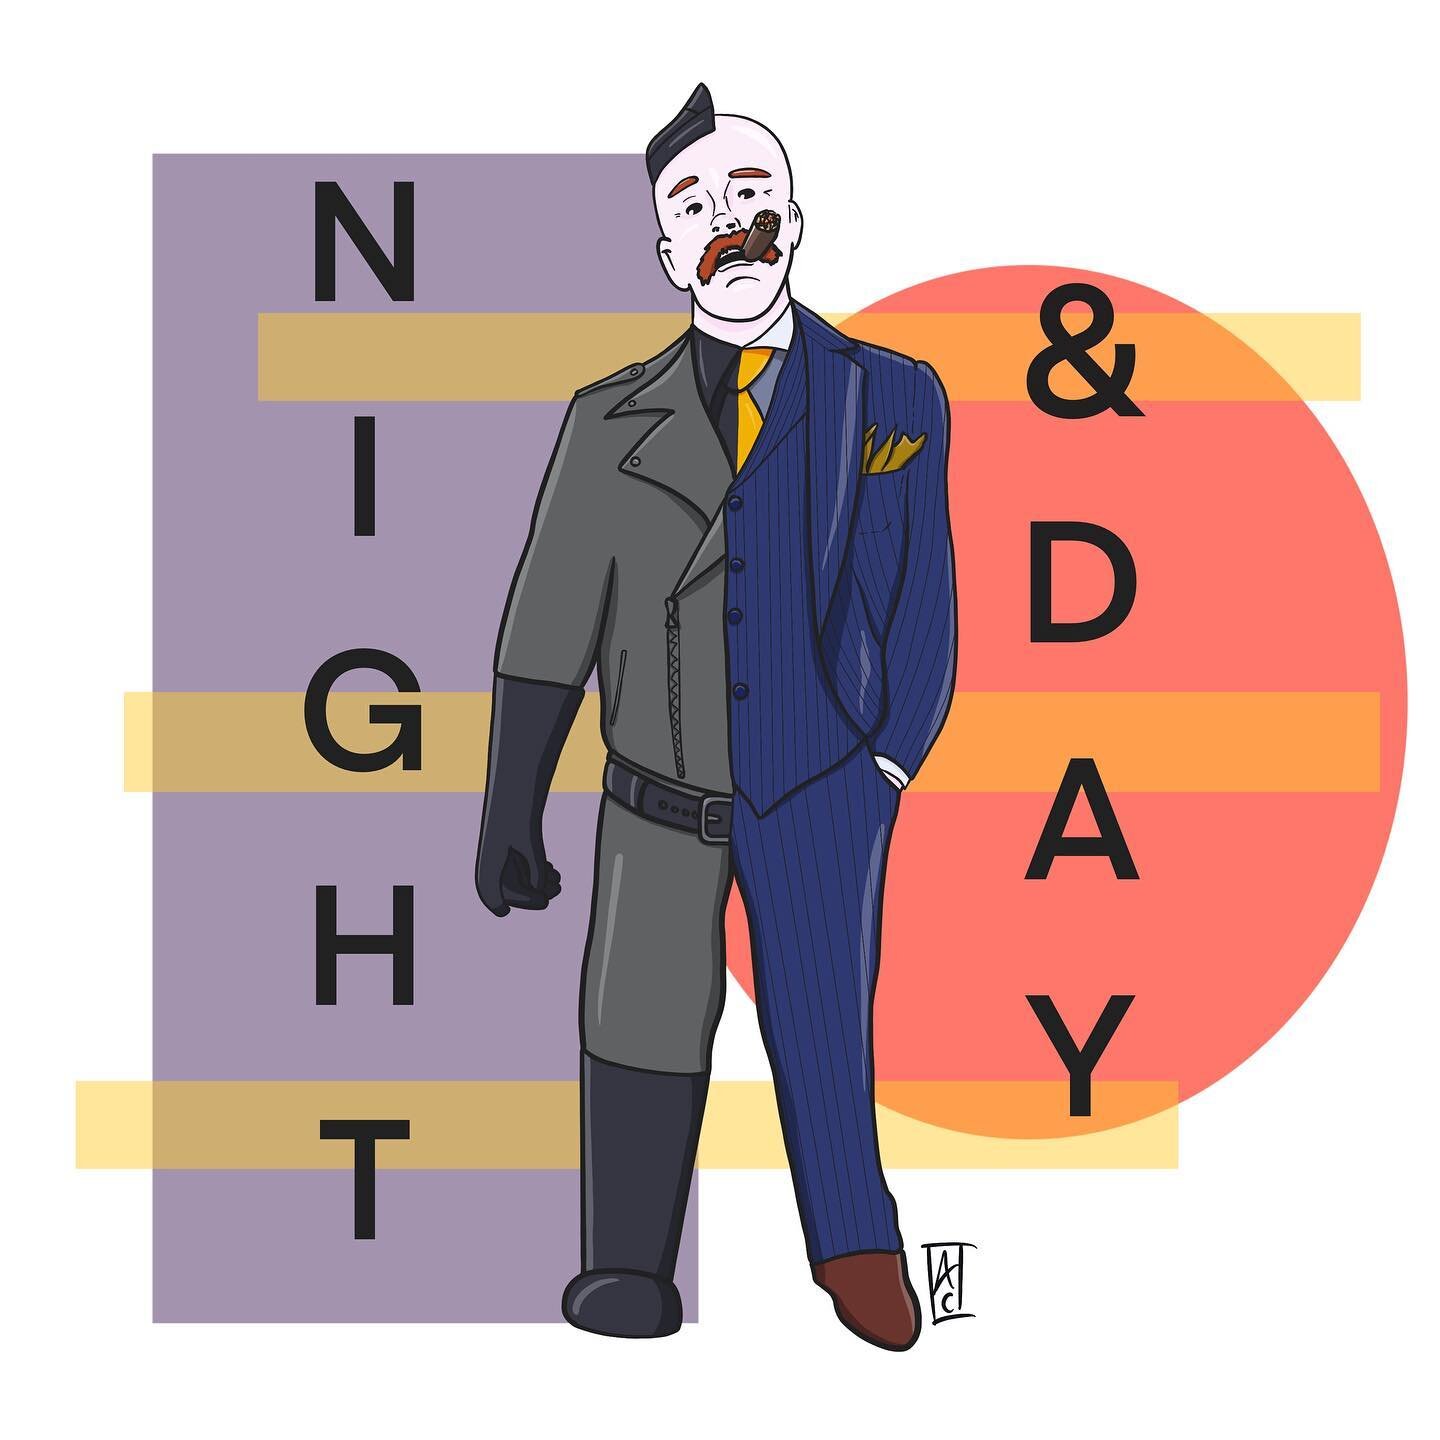 More gay illustration for Pride month! 
Leather by night - Dapper by day. 
#gayart #pridemonth #gayillustration #lgbtq #gayleather #gaysuit